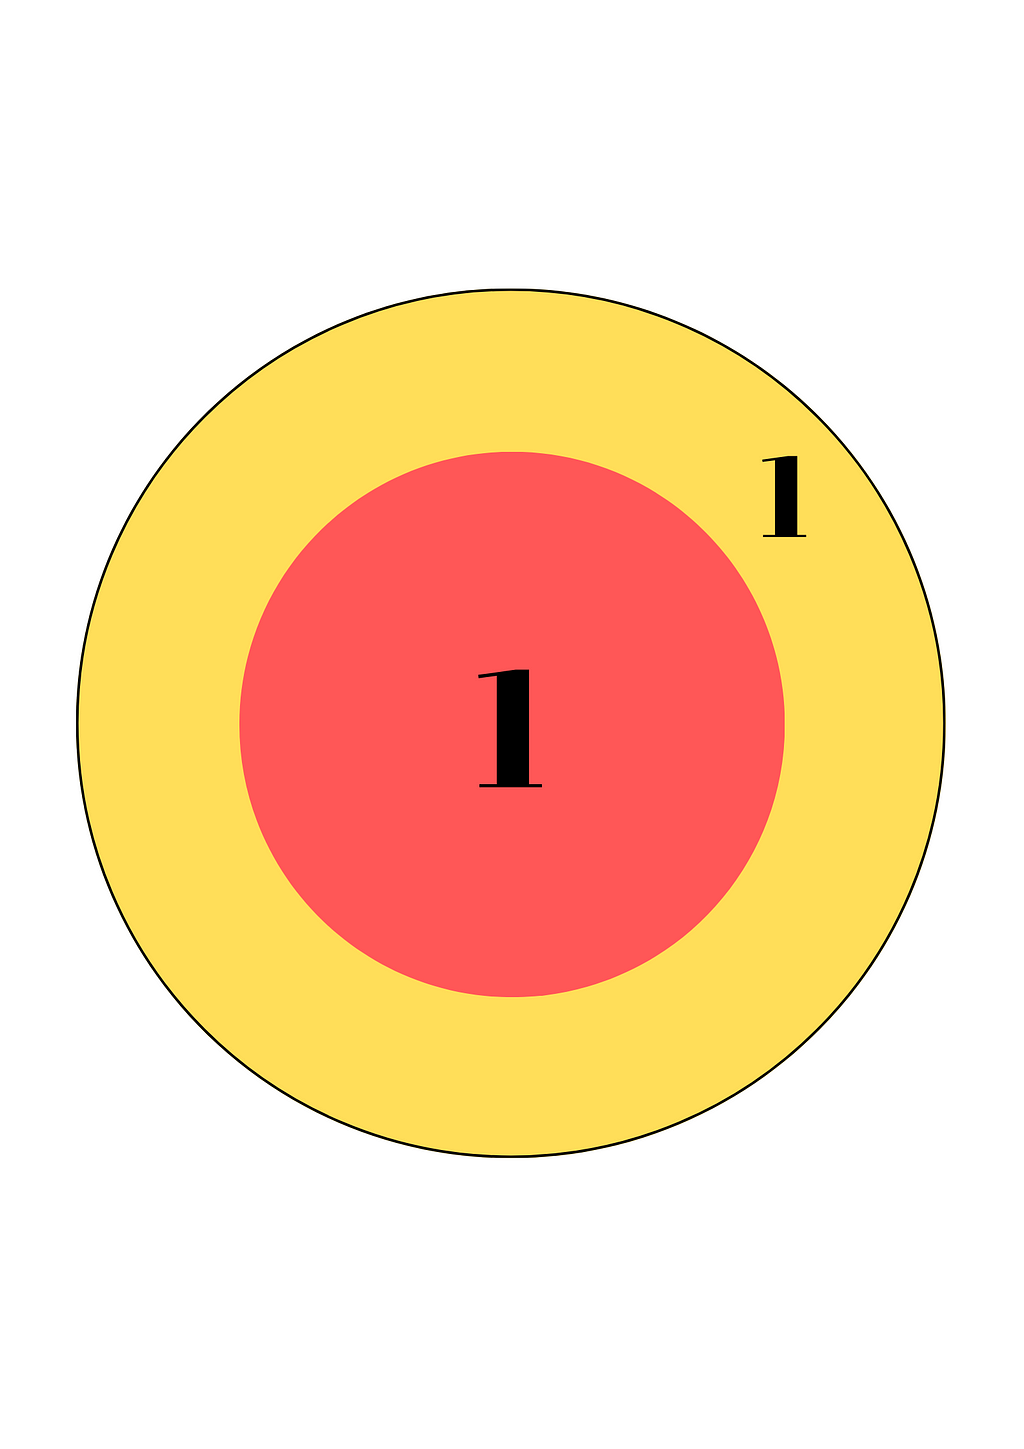 This image creatively depicts the number 2 and suggests its representation as the sum of two ones (1+1).